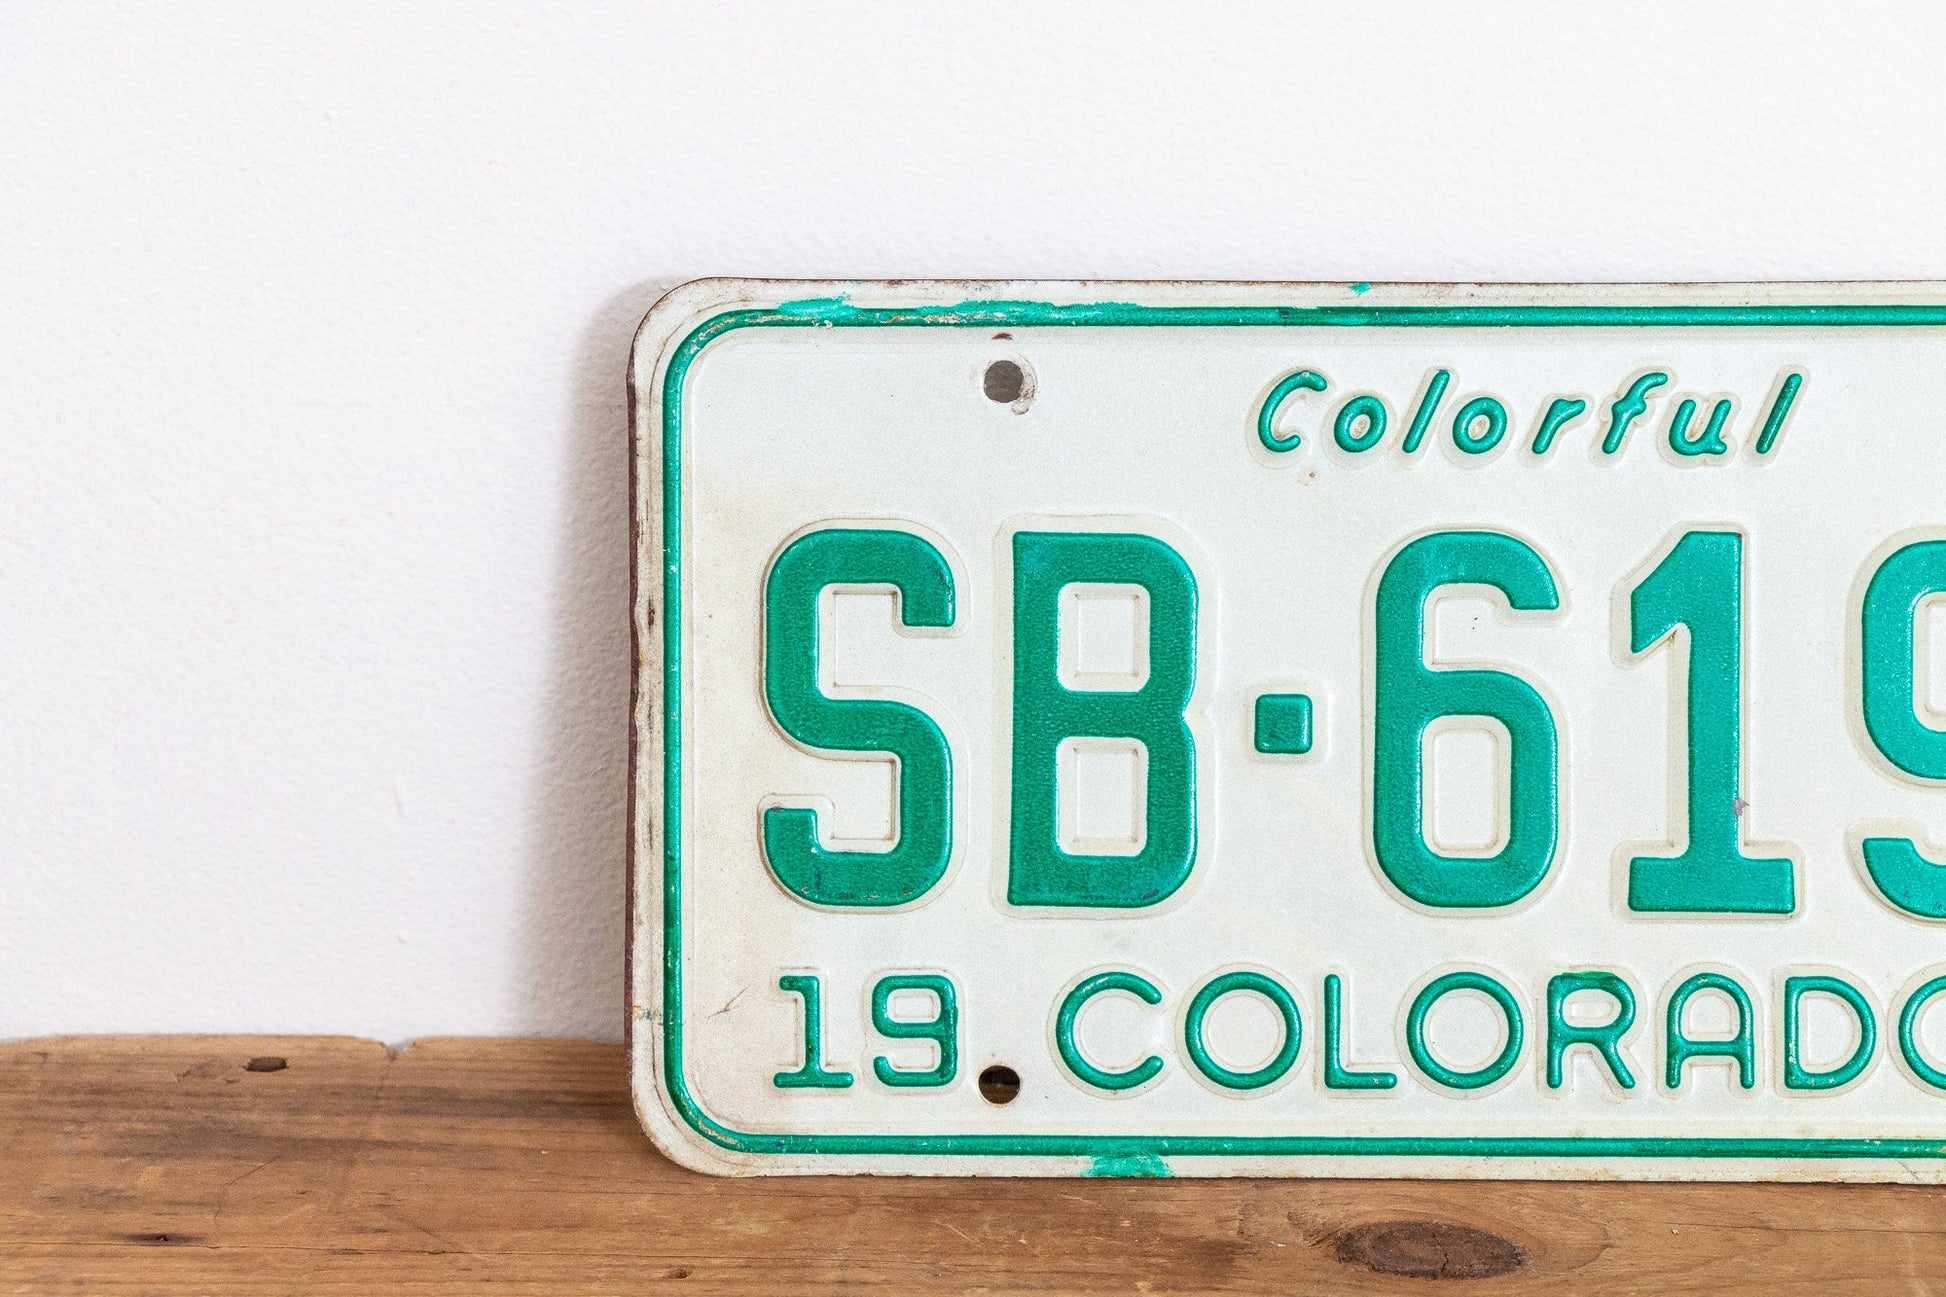 Colorado 1973 License Plate Vintage Wall Hanging Decor - Eagle's Eye Finds